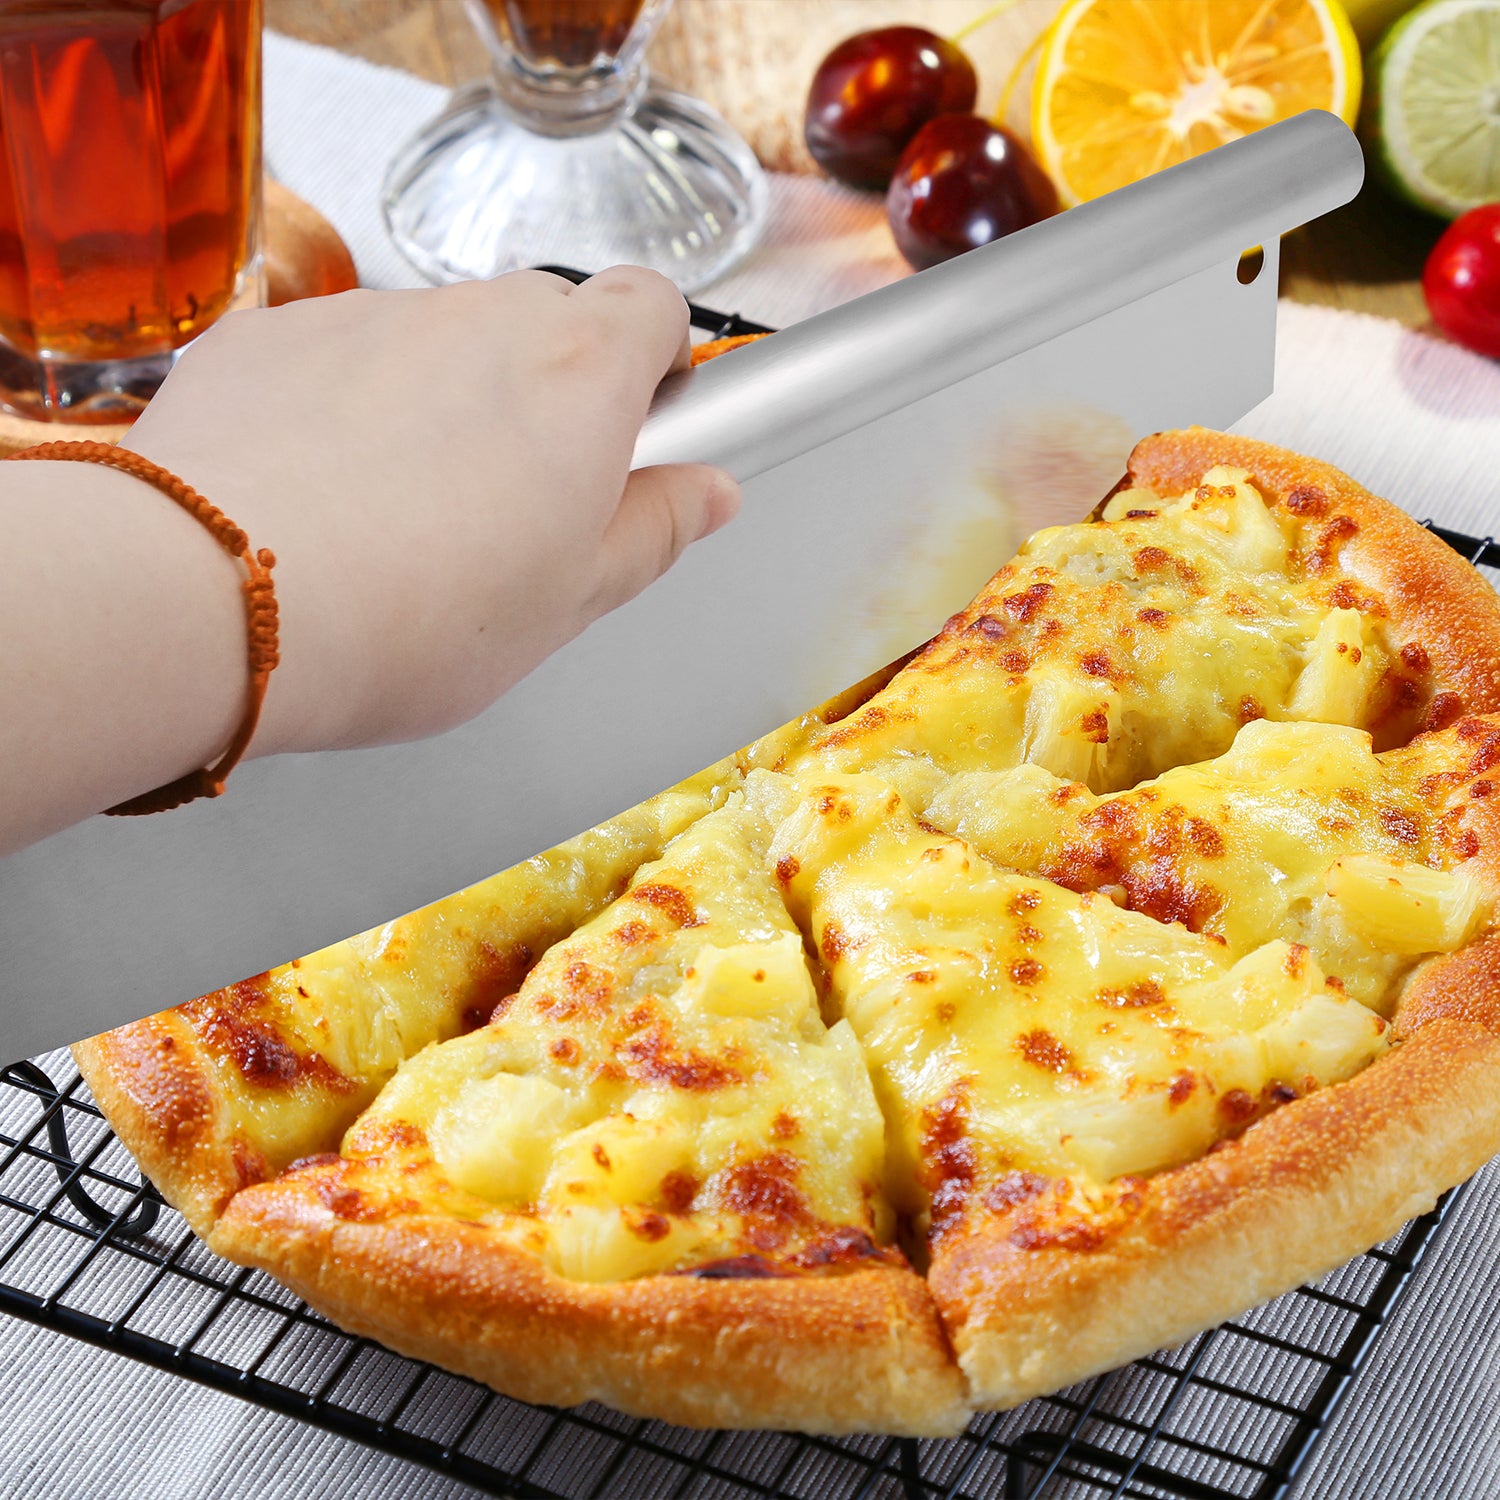 Double Roll Pizza Stainless Steel Knife Pasta Cutter Round Lace